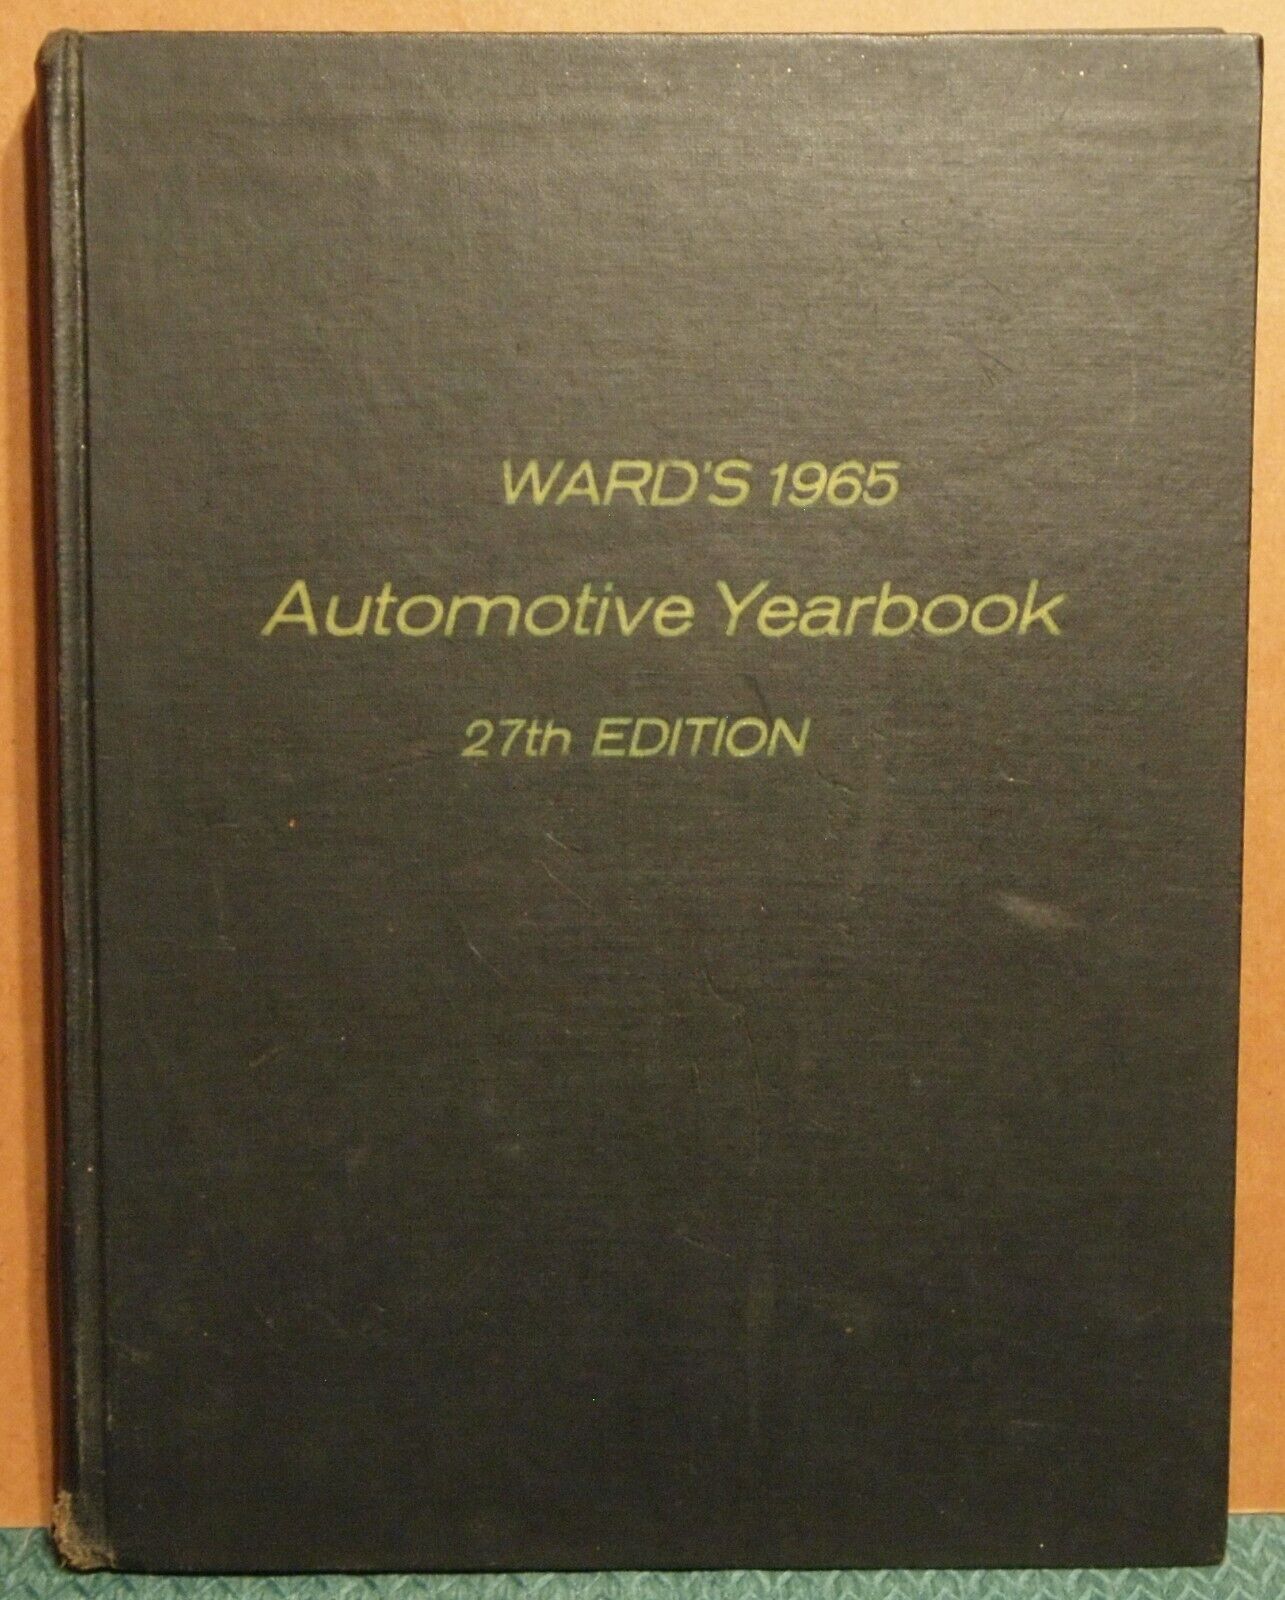 1965 WARD\'S AUTOMOTIVE YEARBOOK 27th edition WARDS-17